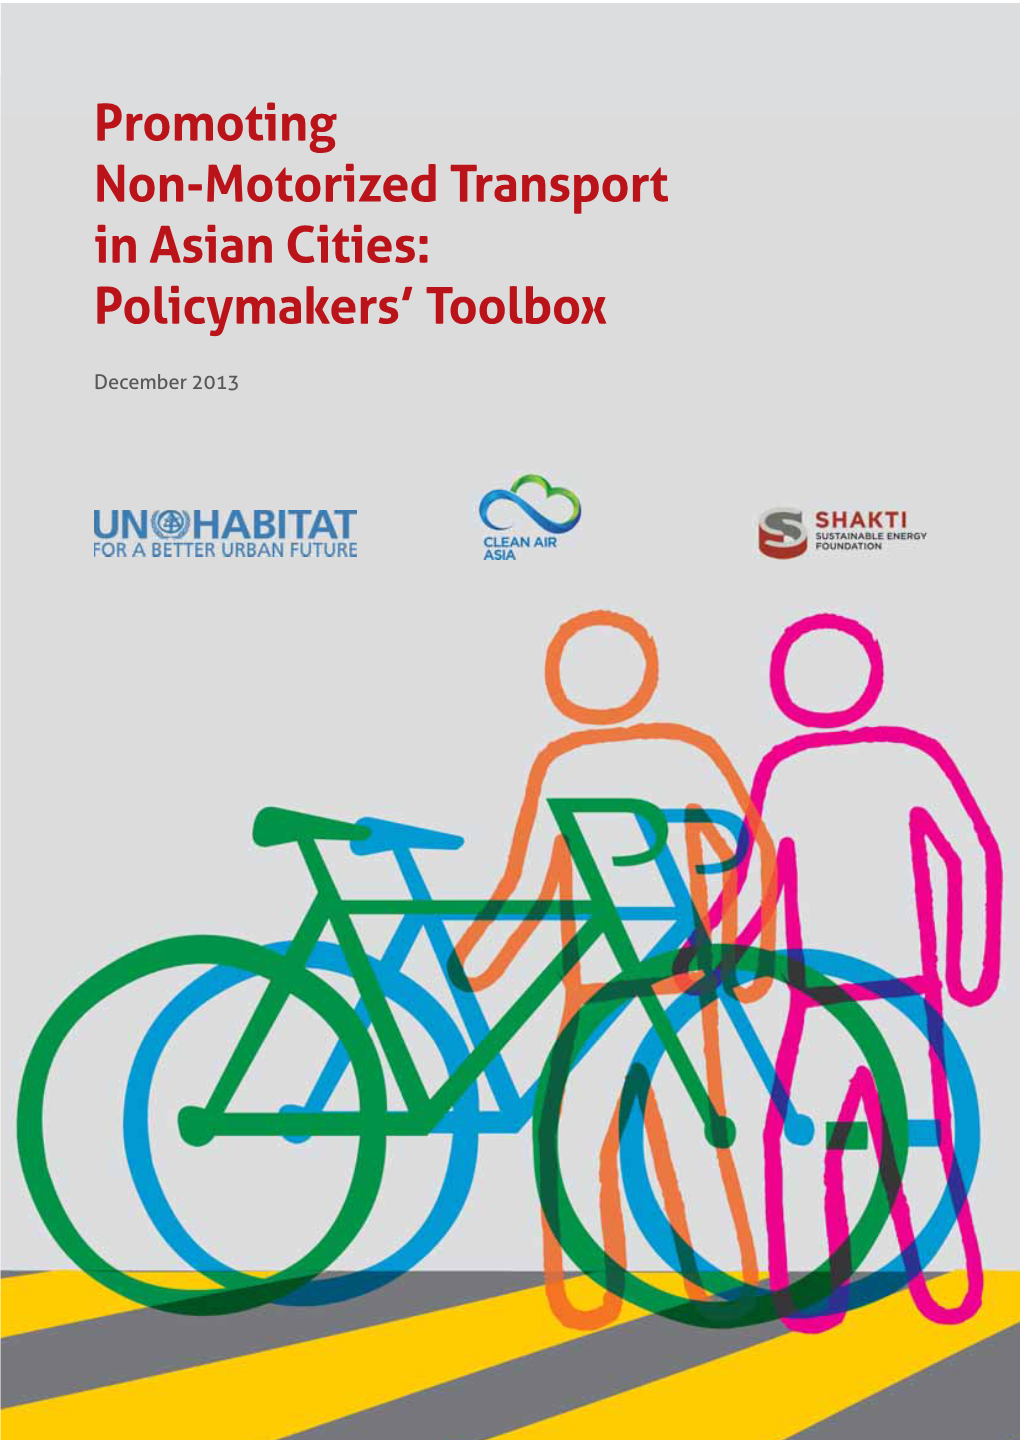 Promoting Non-Motorized Transport in Asian Cities: Policymakers’ Toolbox